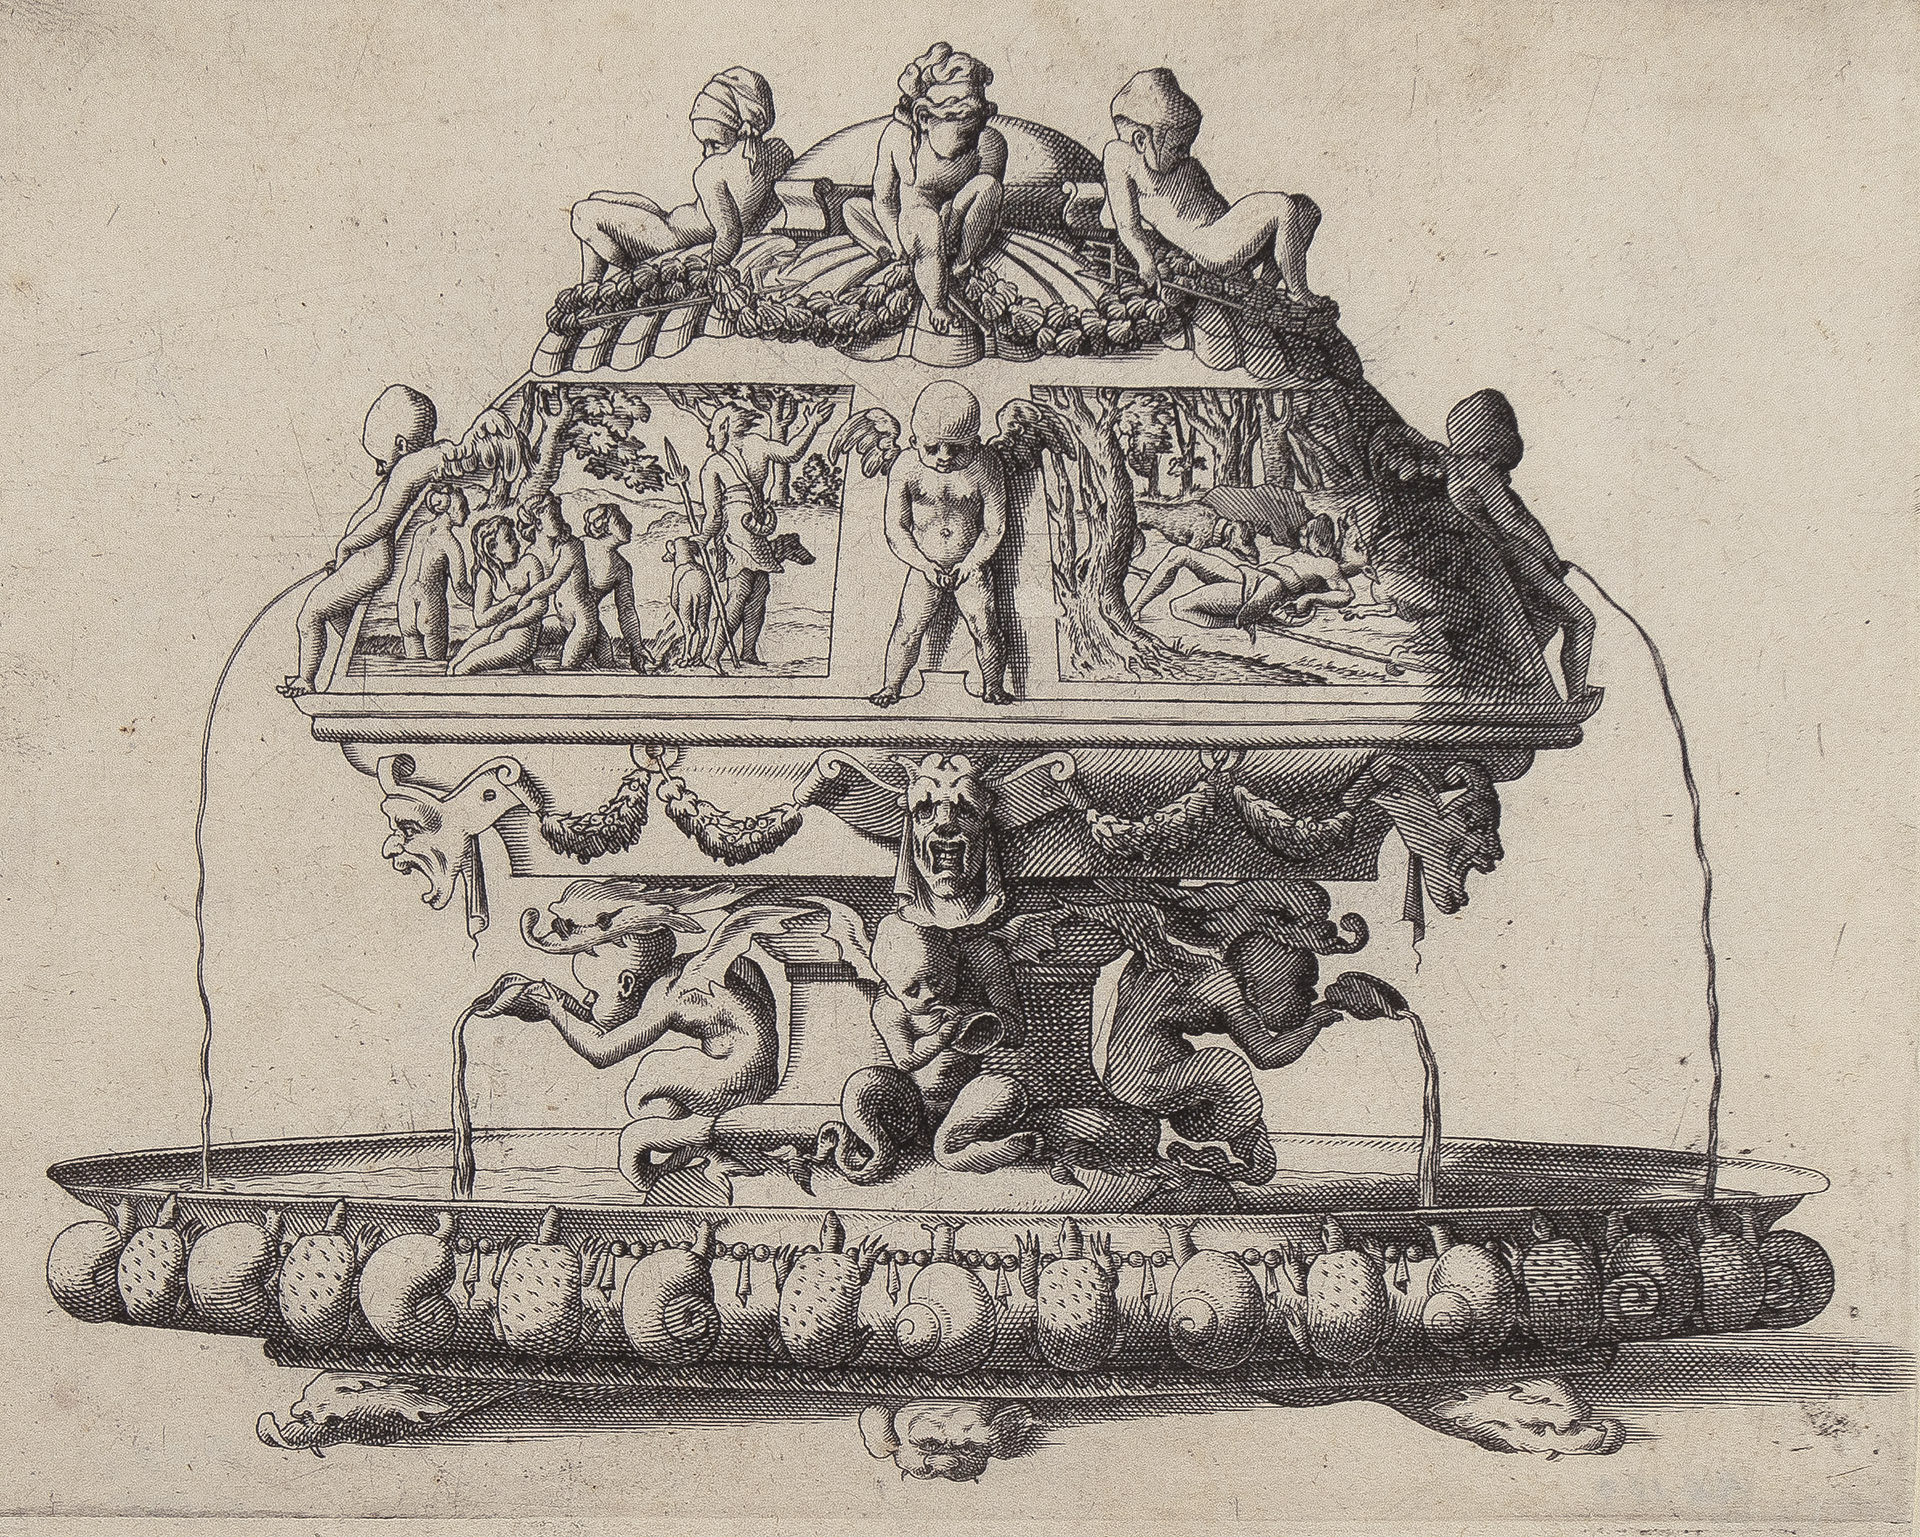 A fountain decorated with figural designs, set within a basin and supported by snails, turtles, and dolphins.